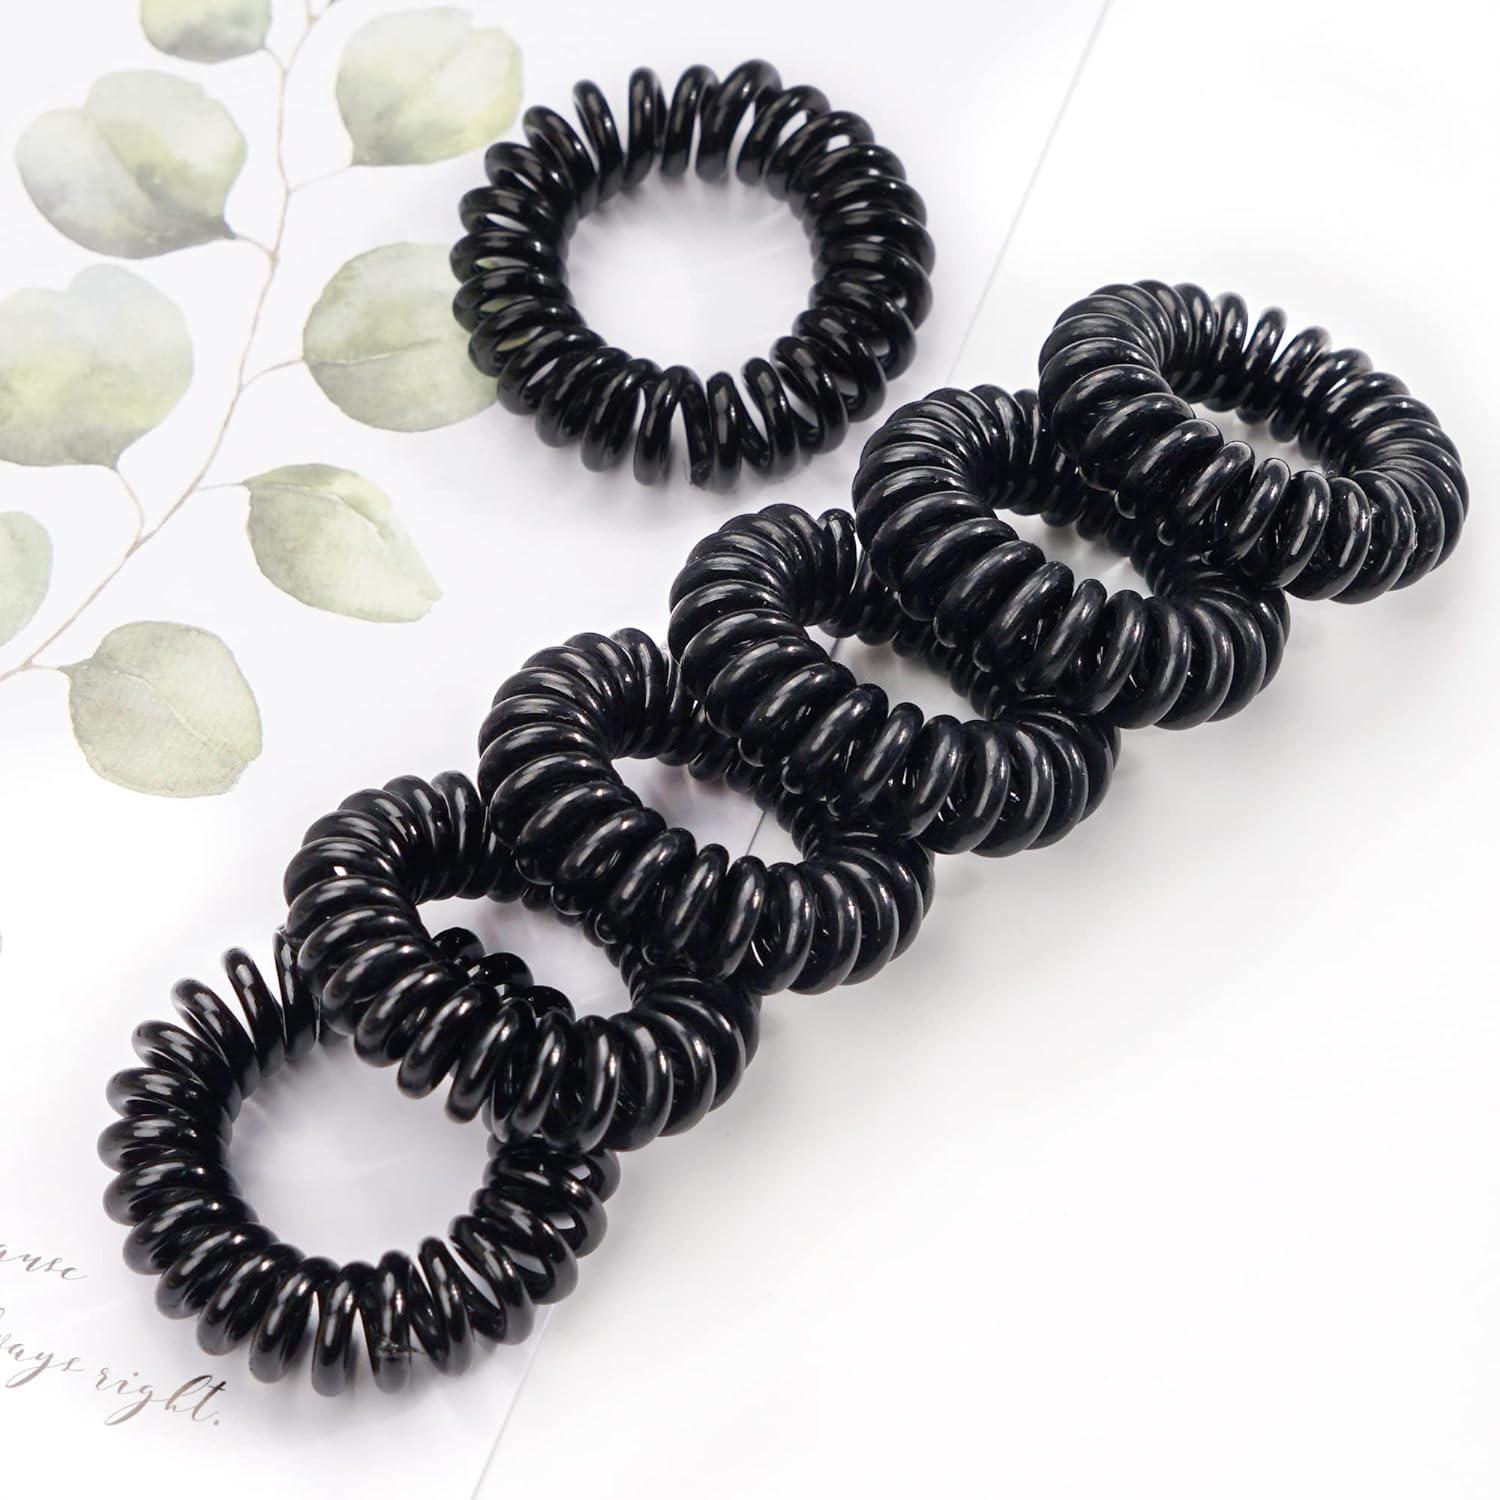 20 Pcs Spiral Hair Ties - Traceless Coil Hair Ties Elastic Spiral Ponytail  Holder Waterproof Plastic Hair Coil Bands For Women Girls Teenagers